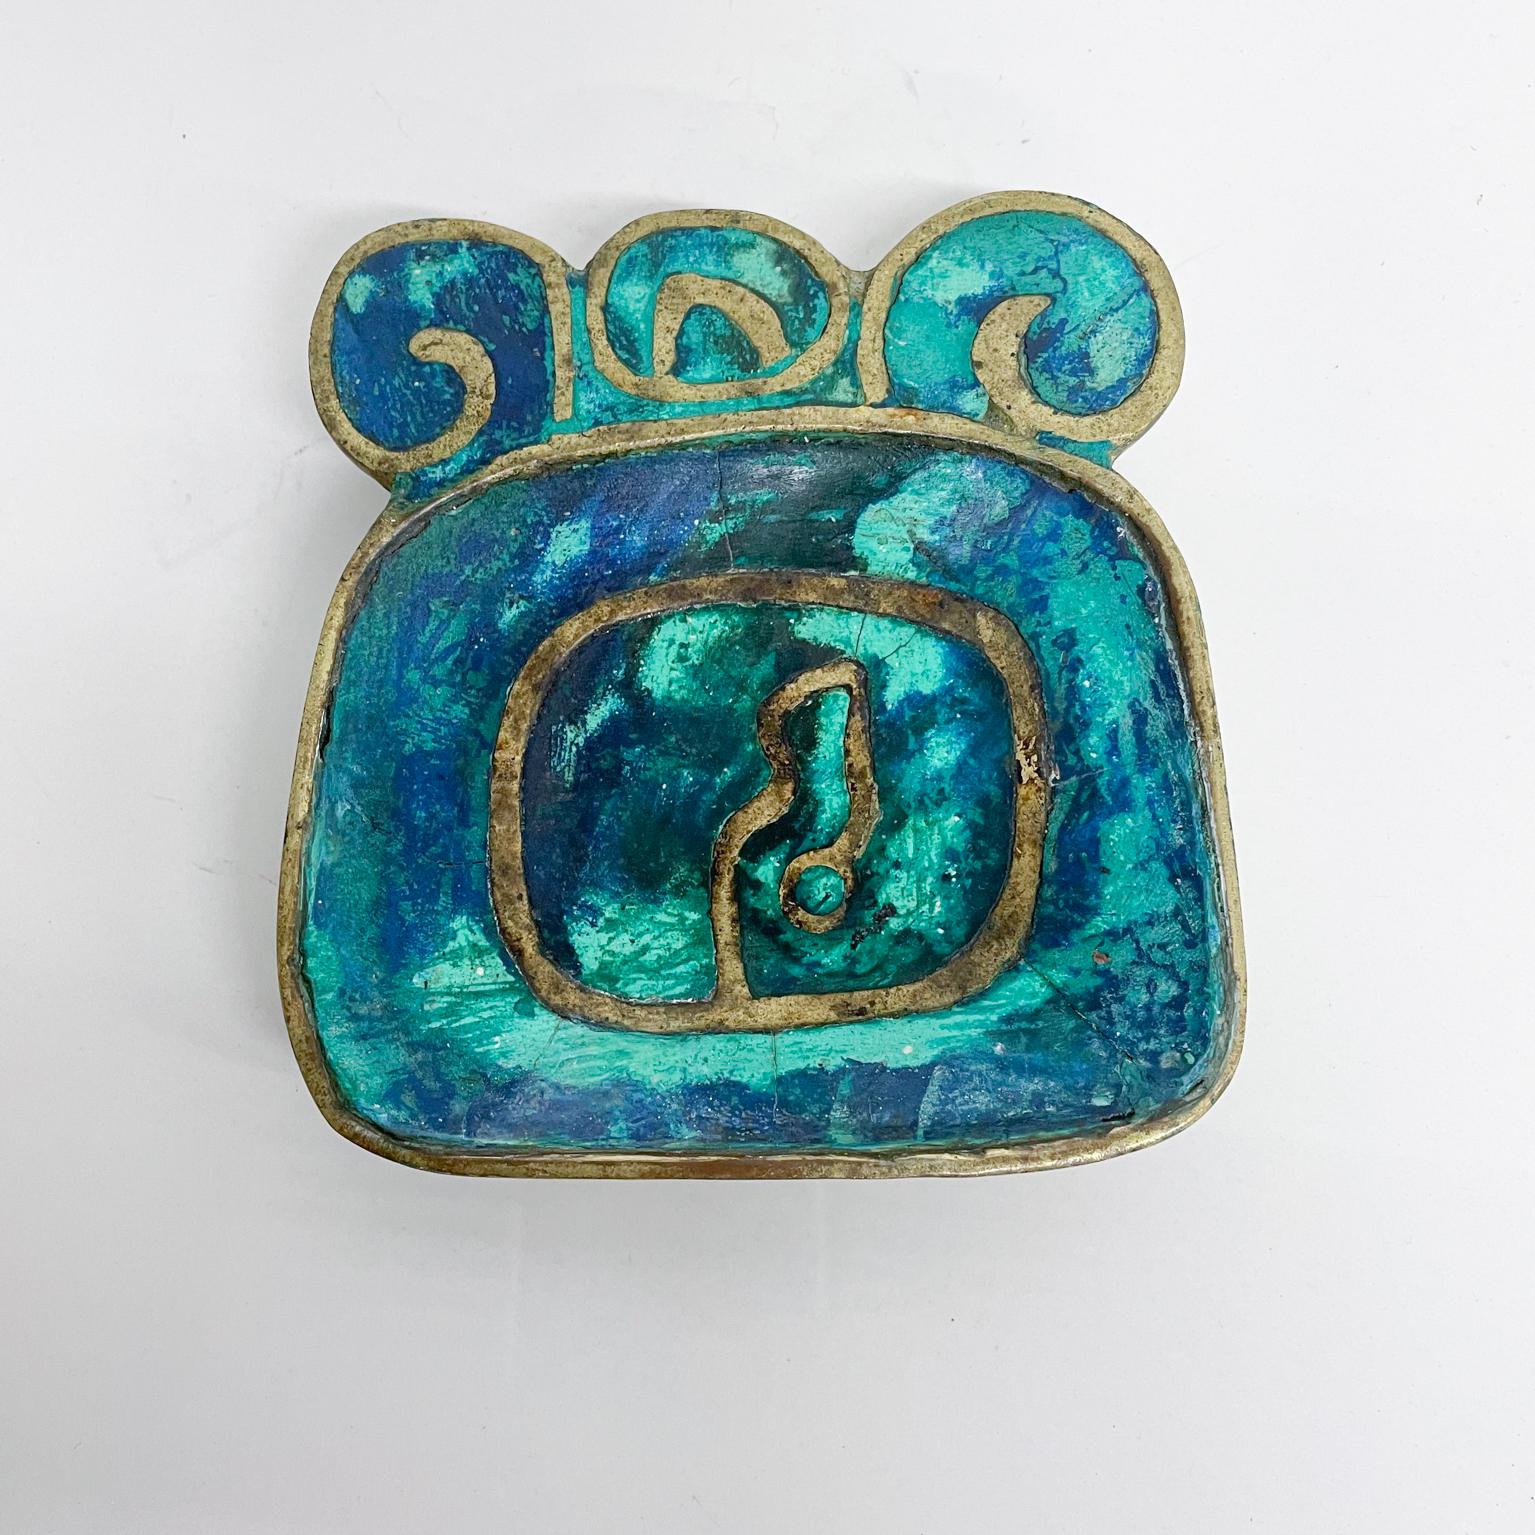 For your consideration: Fabulous Pepe Mendoza Ashtray Decorative Dish Made in Mexico circa 1958.
Rich Patinated Brass with Beautiful Malachite. 
Dimensions: 4.38 W x 4.75 D x .75 tall
Original vintage unrestored condition. Patina present. Refer